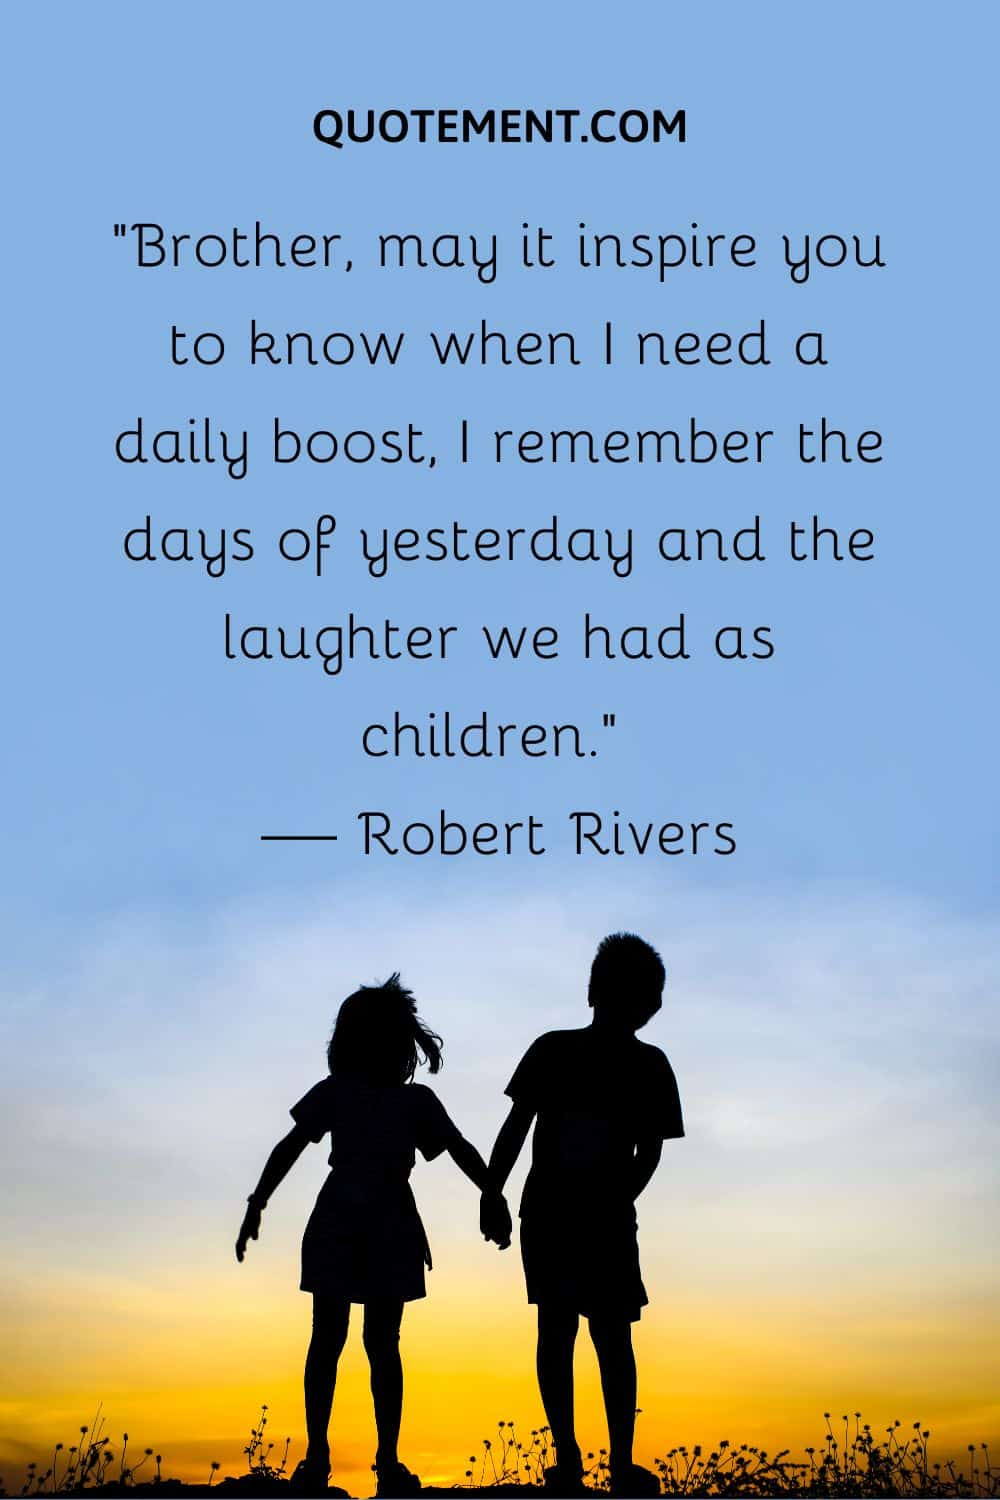 “Brother, may it inspire you to know when I need a daily boost, I remember the days of yesterday and the laughter we had as children.” — Robert Rivers